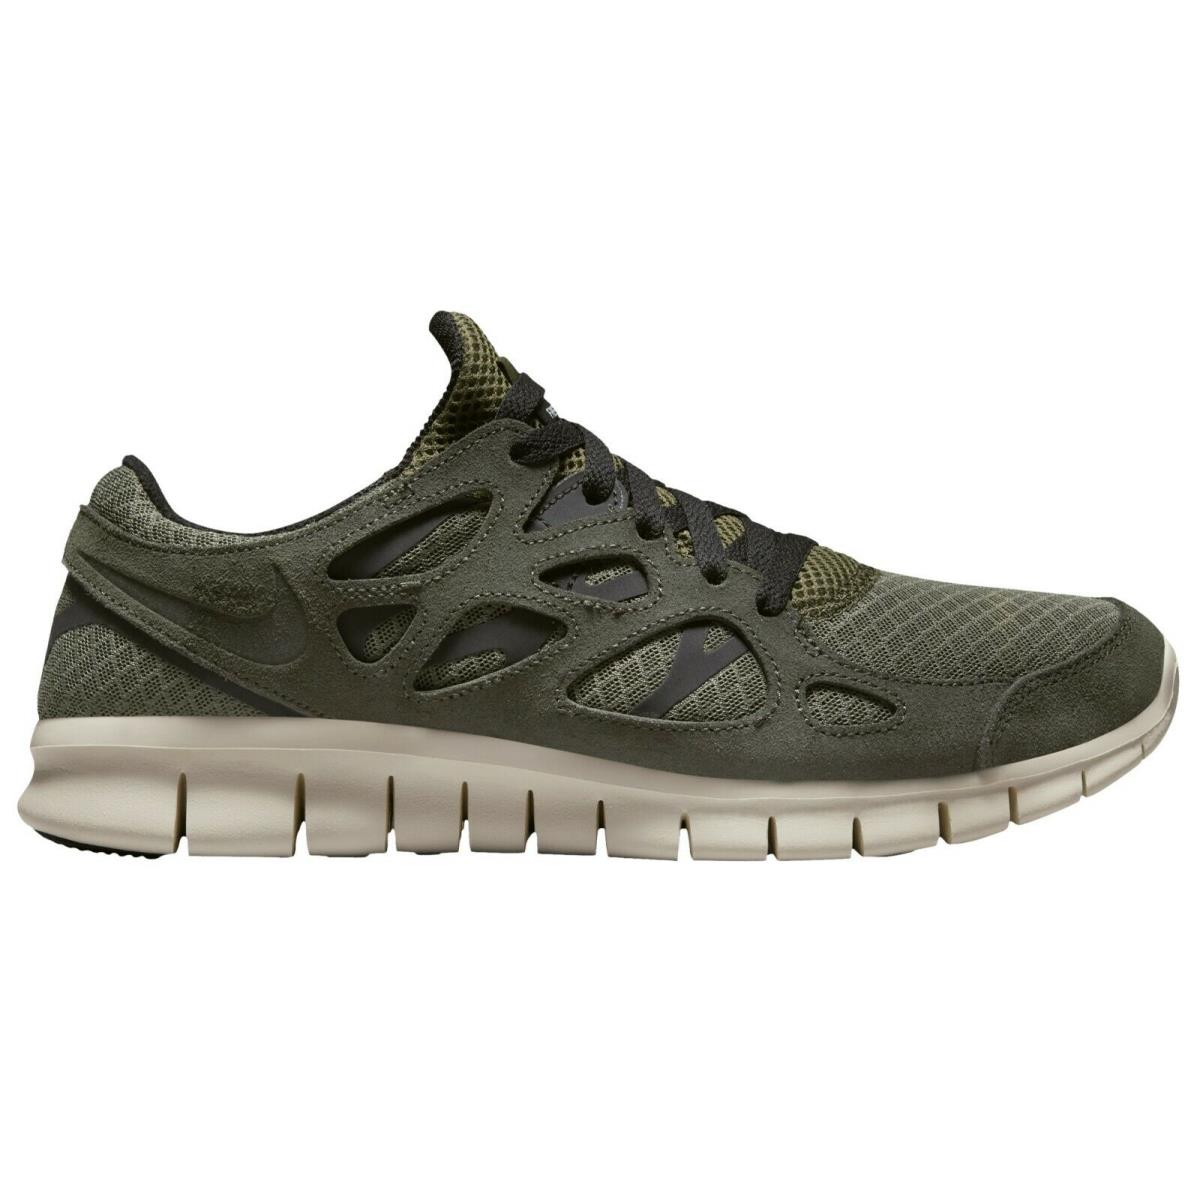 Nike Free Run 2 Mens 537732-305 Sequoia Olive Sail Black Running Shoes Size 10.5